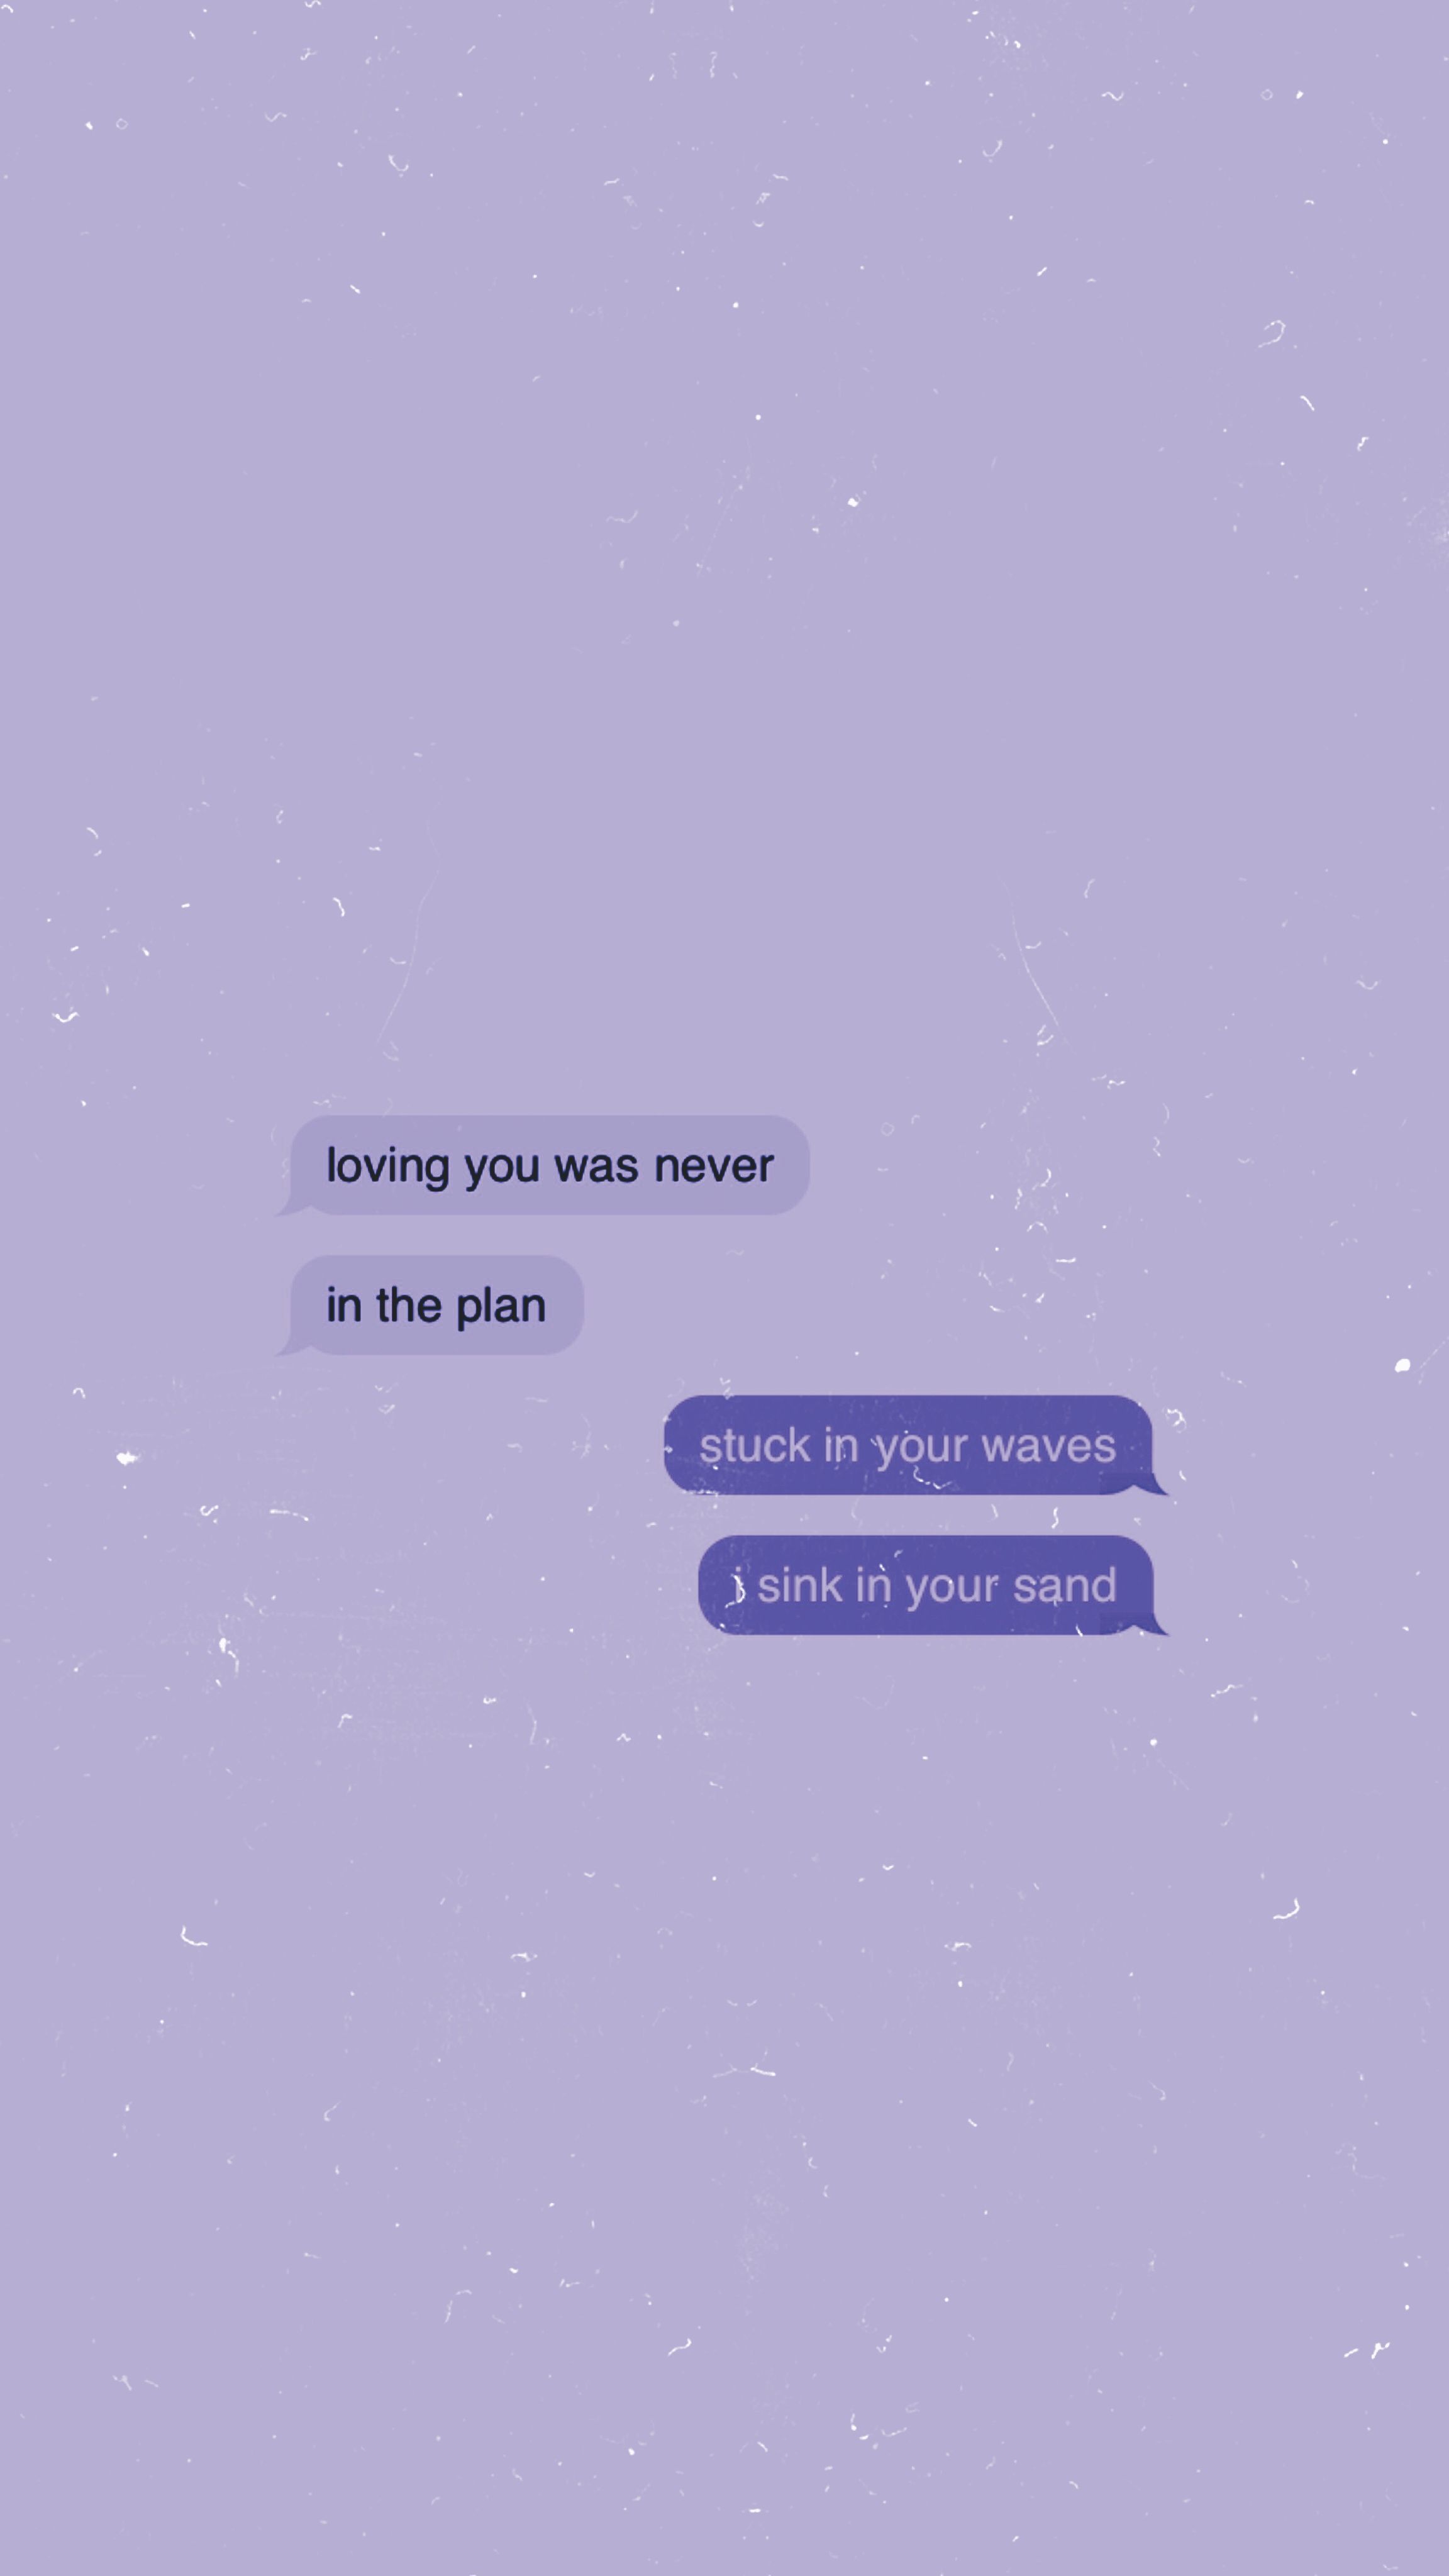 why don't plan X falling lyrics. Cute text messages, Message wallpaper, Text message quotes